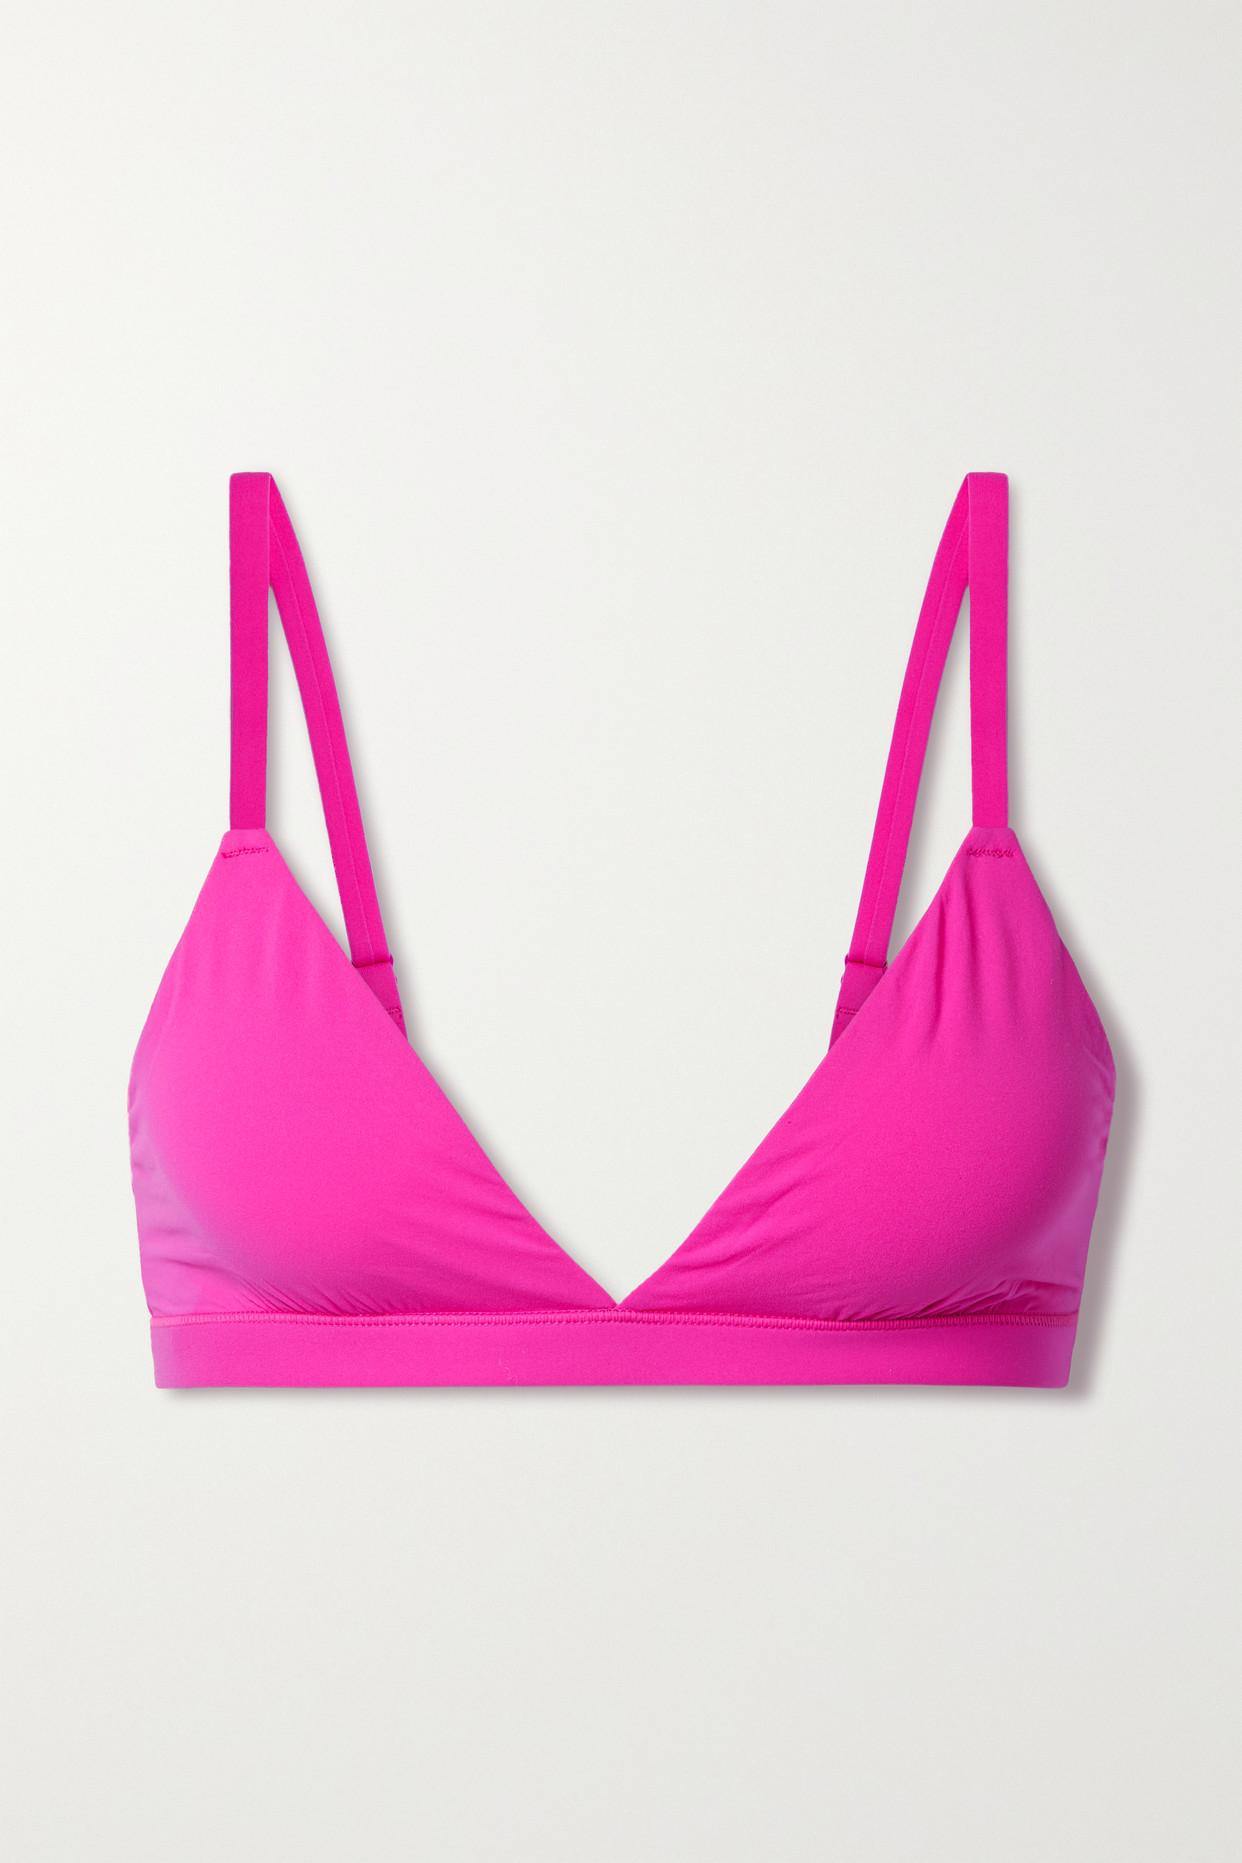 Skims Fits Everybody Triangle Bralette in Pink